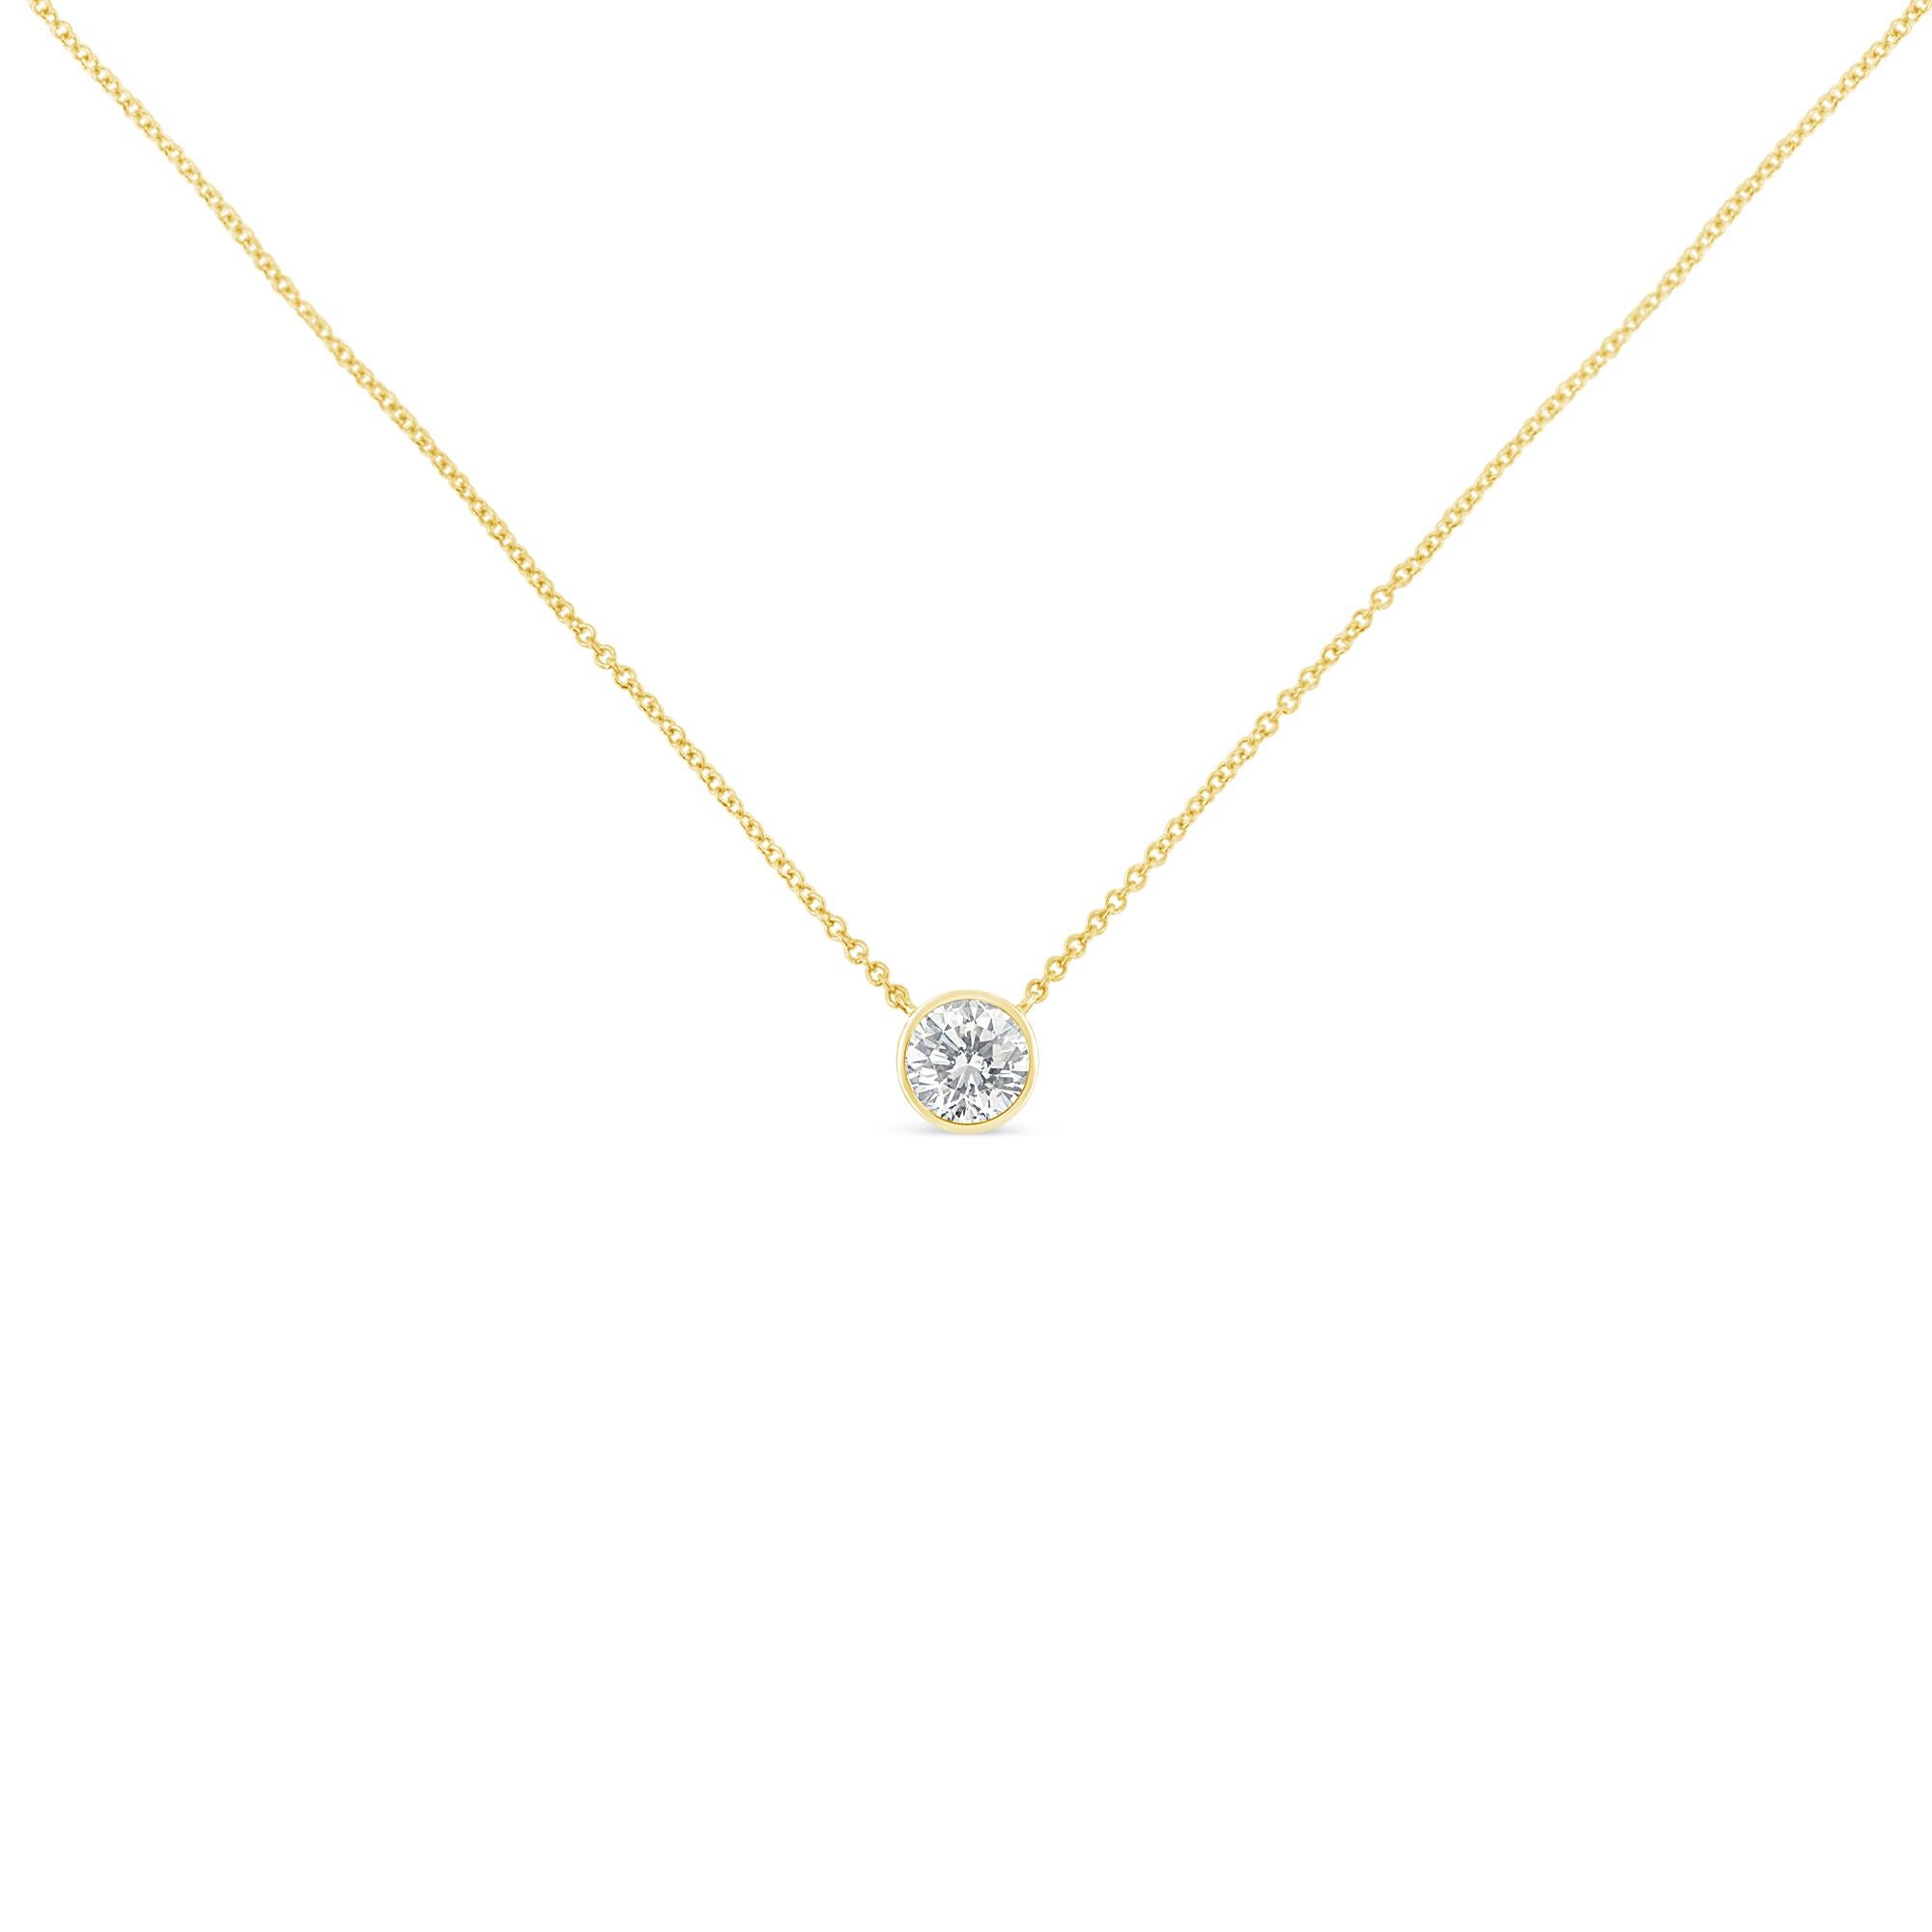 Modern AGS Certified 10k Yellow Gold 1/10ct Diamond Solitaire Pendant Necklace For Sale